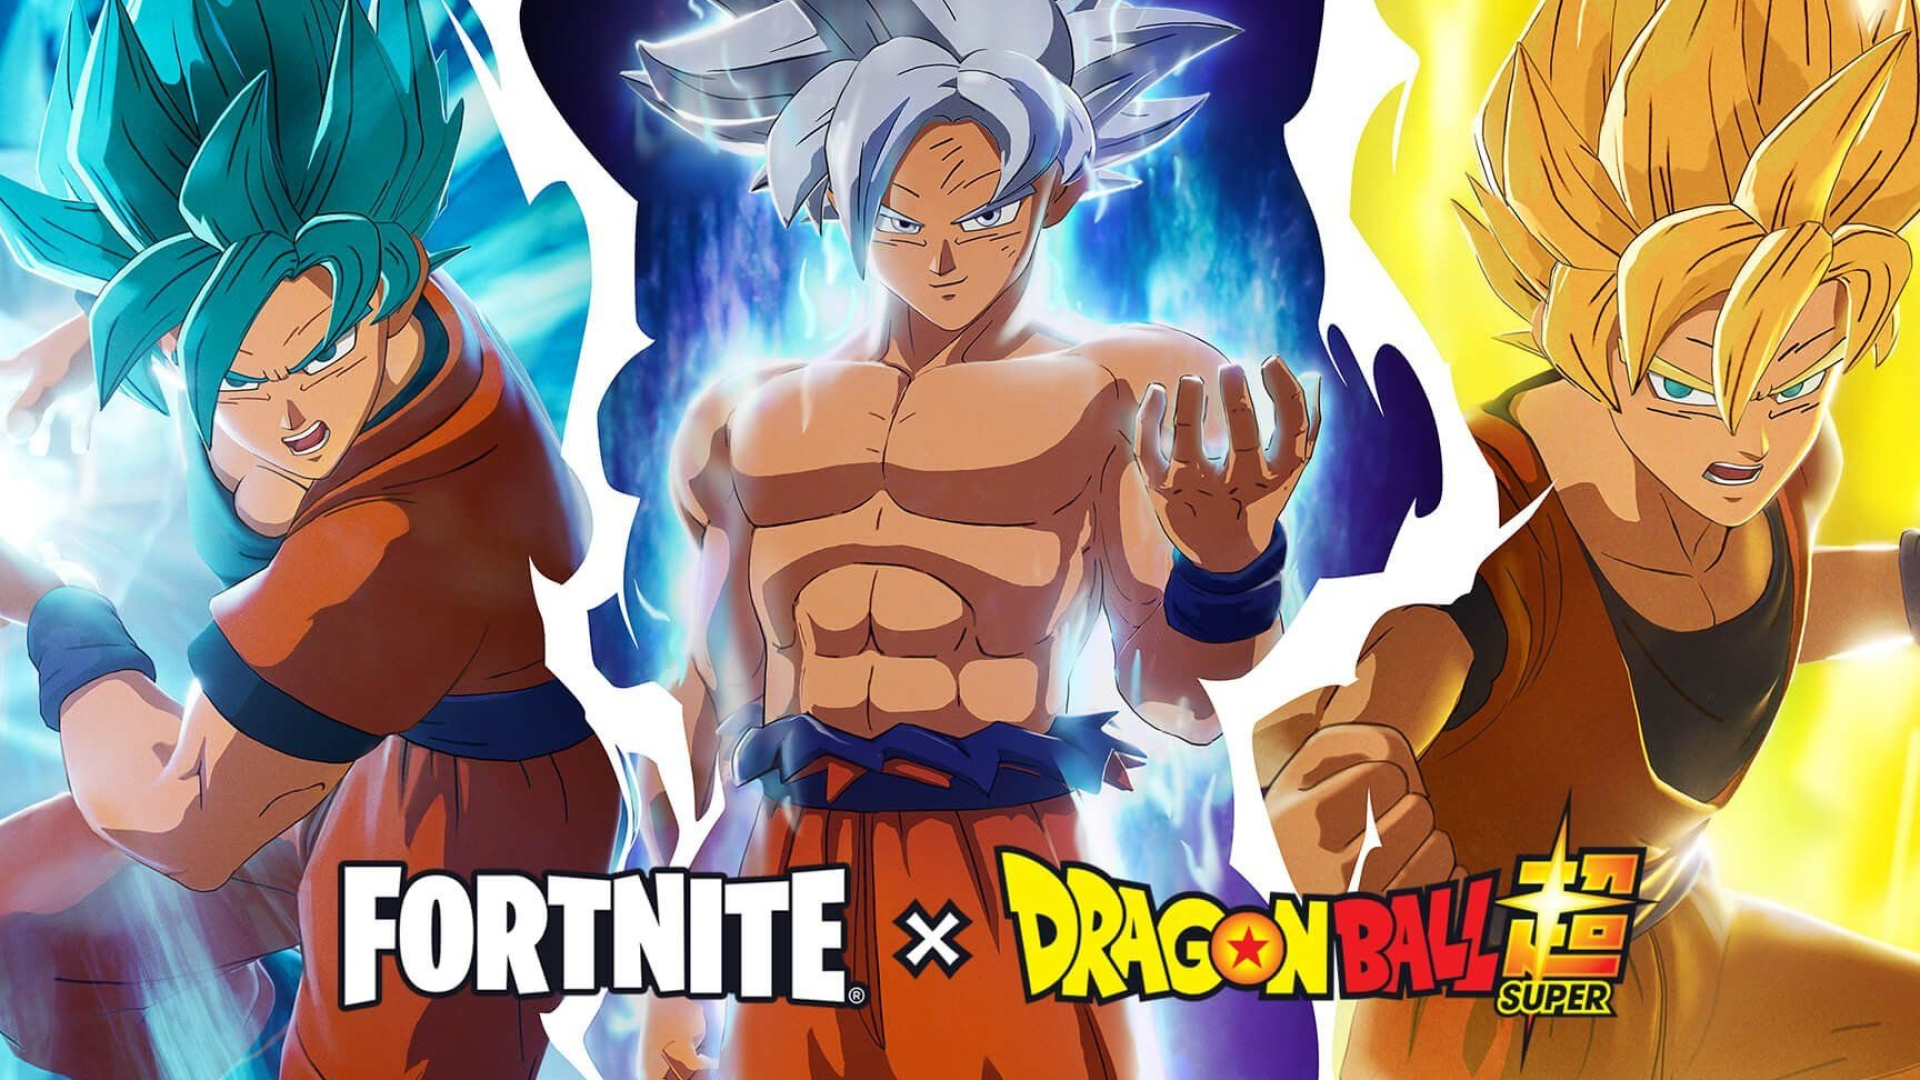 Exclusive Dragon Ball Super Hero clip, Fortnite collaboration, In-game experience, Exciting crossover, 1920x1080 Full HD Desktop